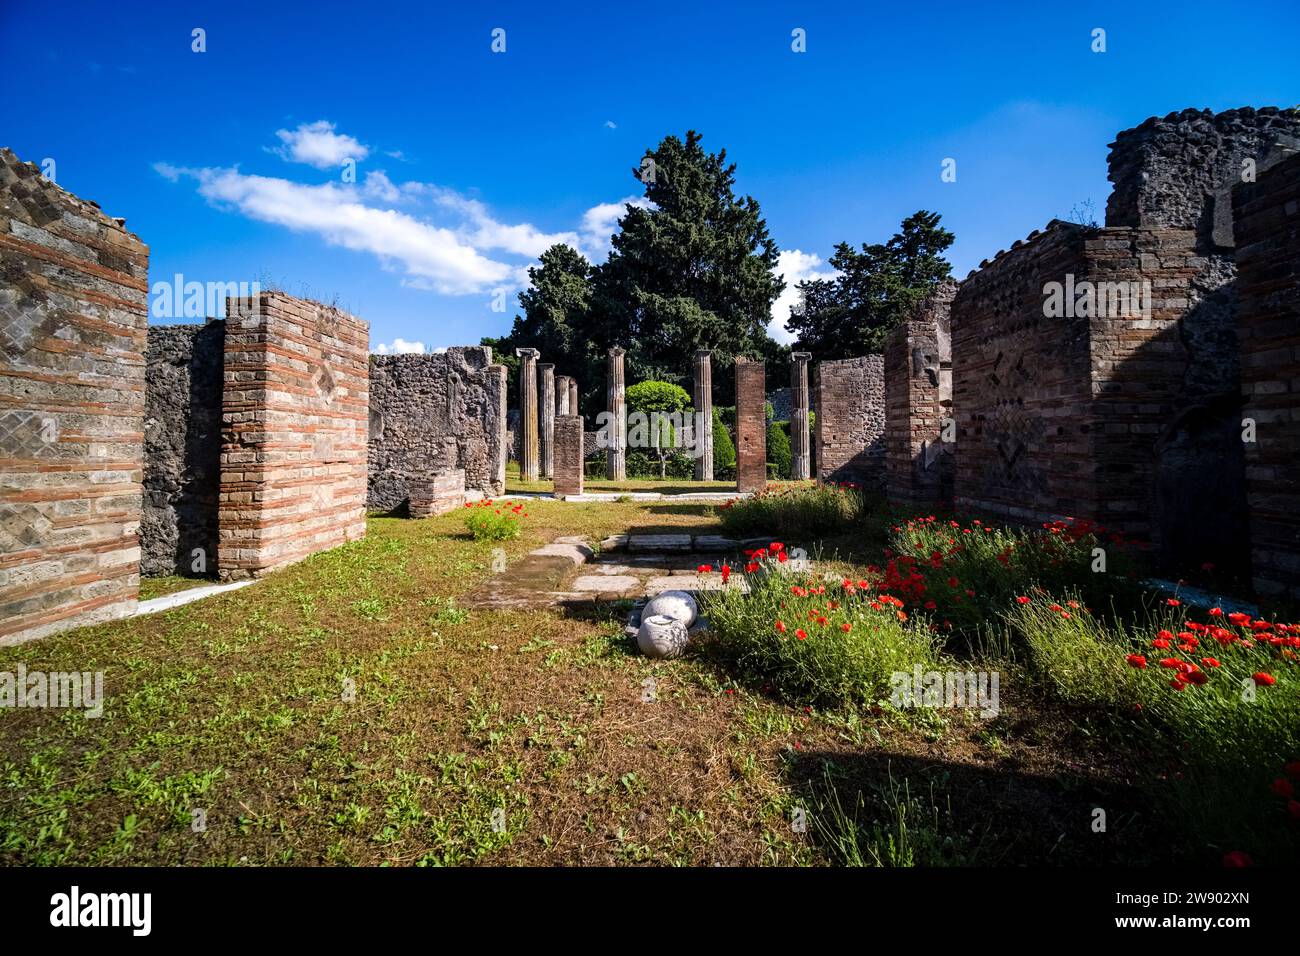 Ruins of the Casa del Gallo in the archaeological site of Pompeii, an ancient city destroyed by the eruption of Mount Vesuvius in 79 AD. Stock Photo